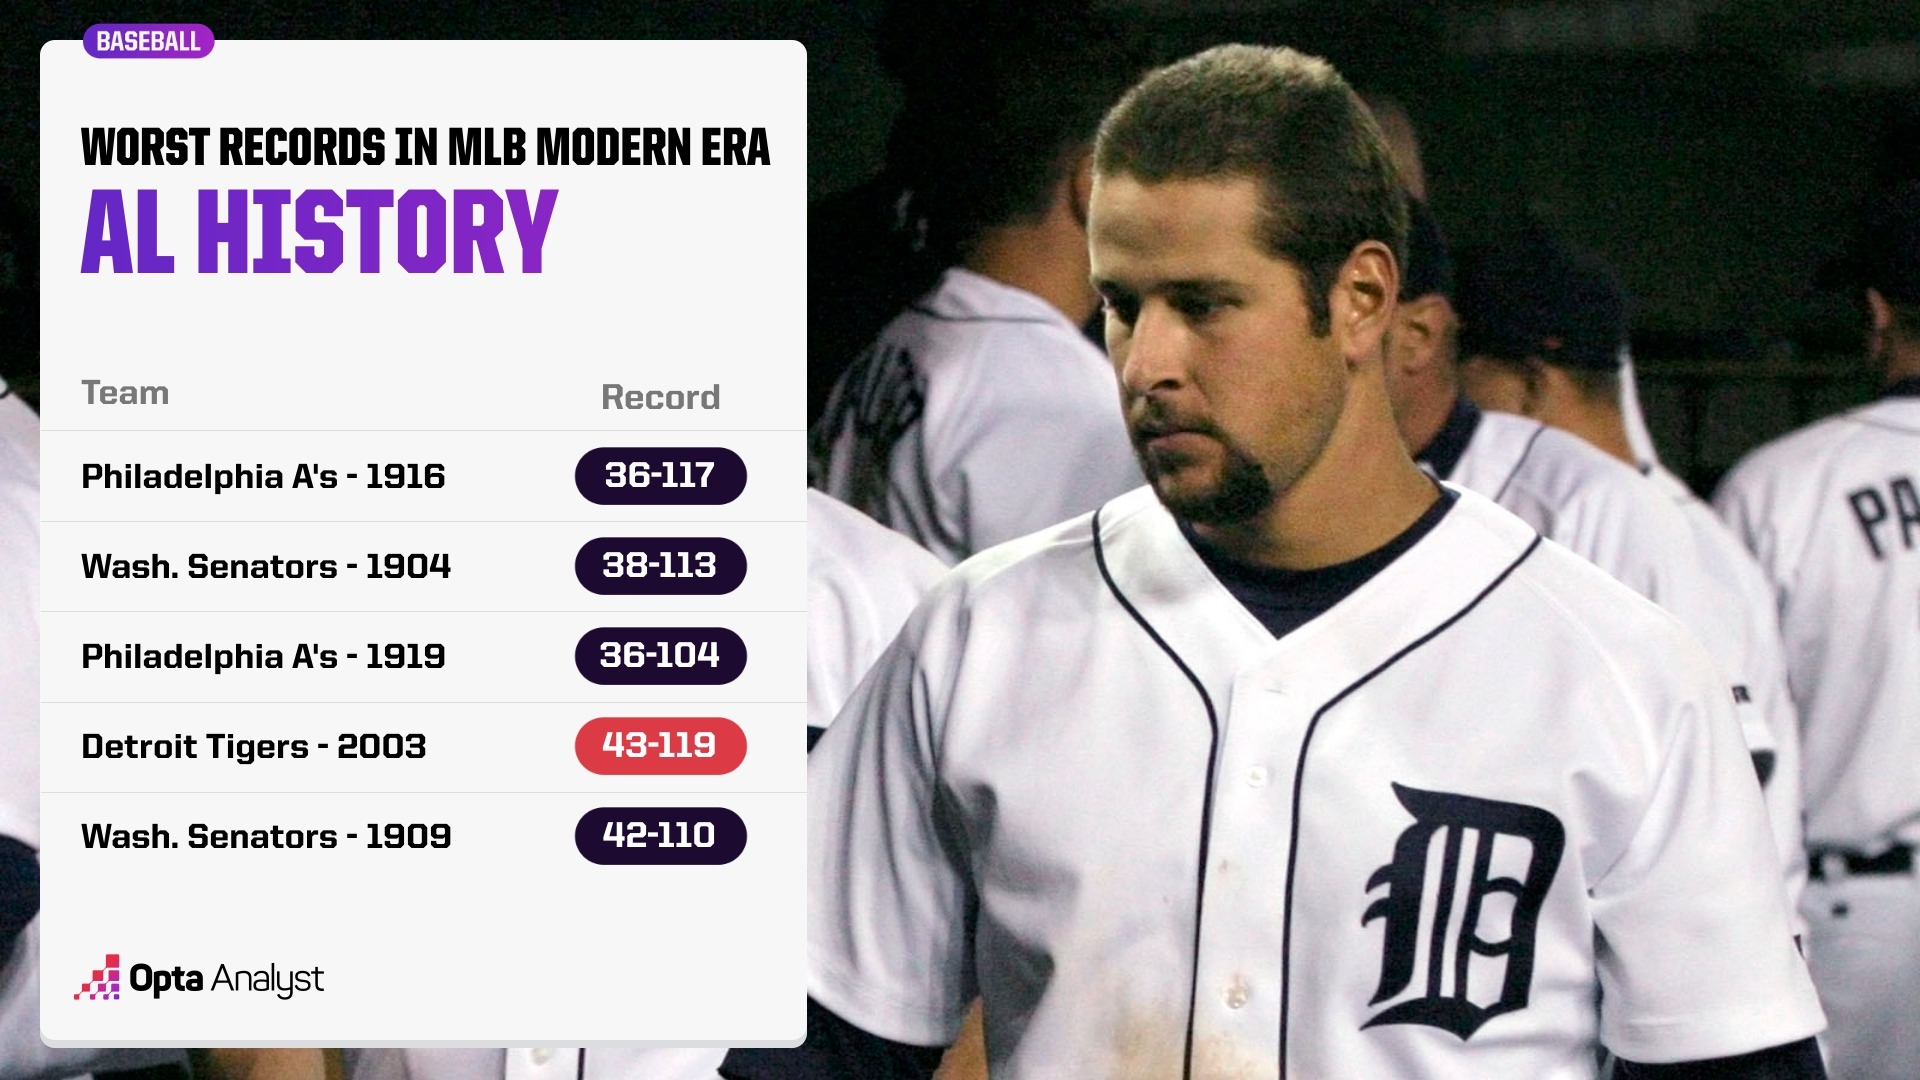 Which Team Finished With the Worst Record in MLB History?